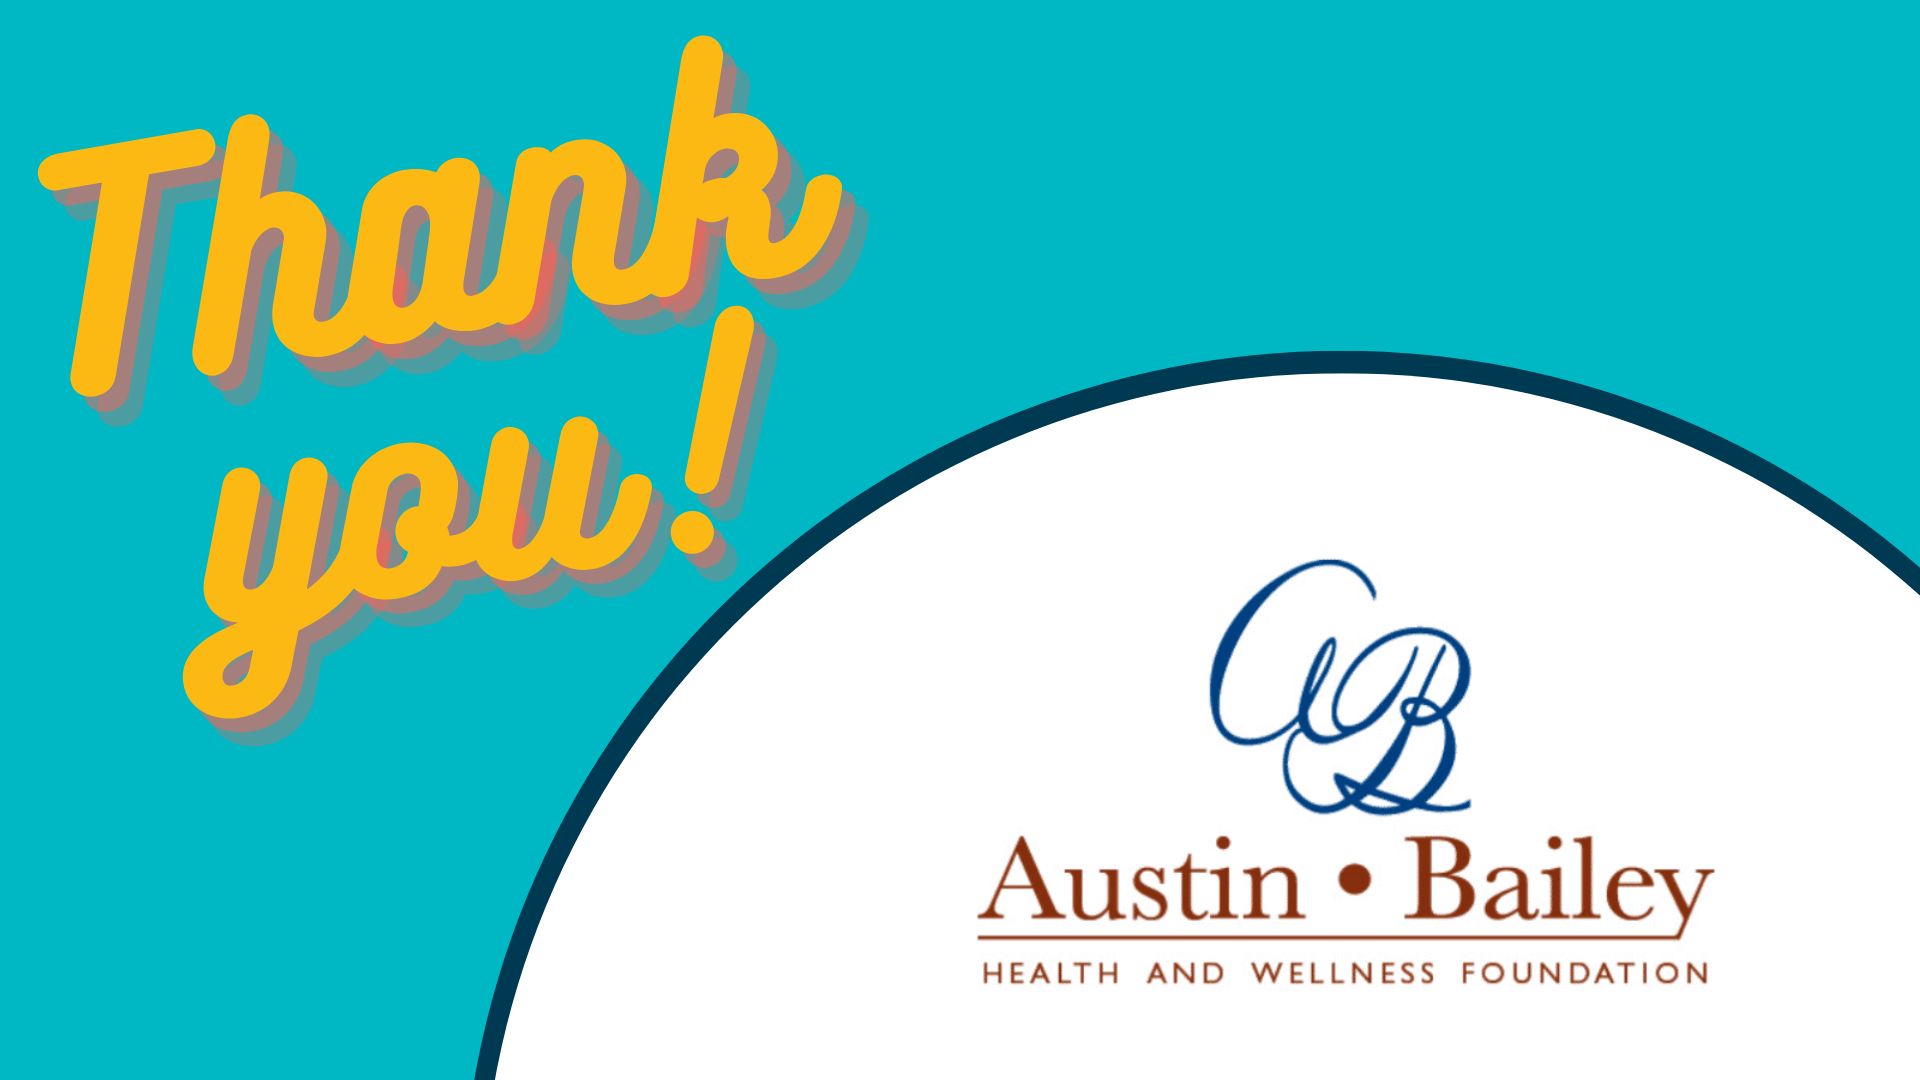 Funding from Austin-Bailey Health and Wellness Foundation Supports Nutrition for Homebound Seniors